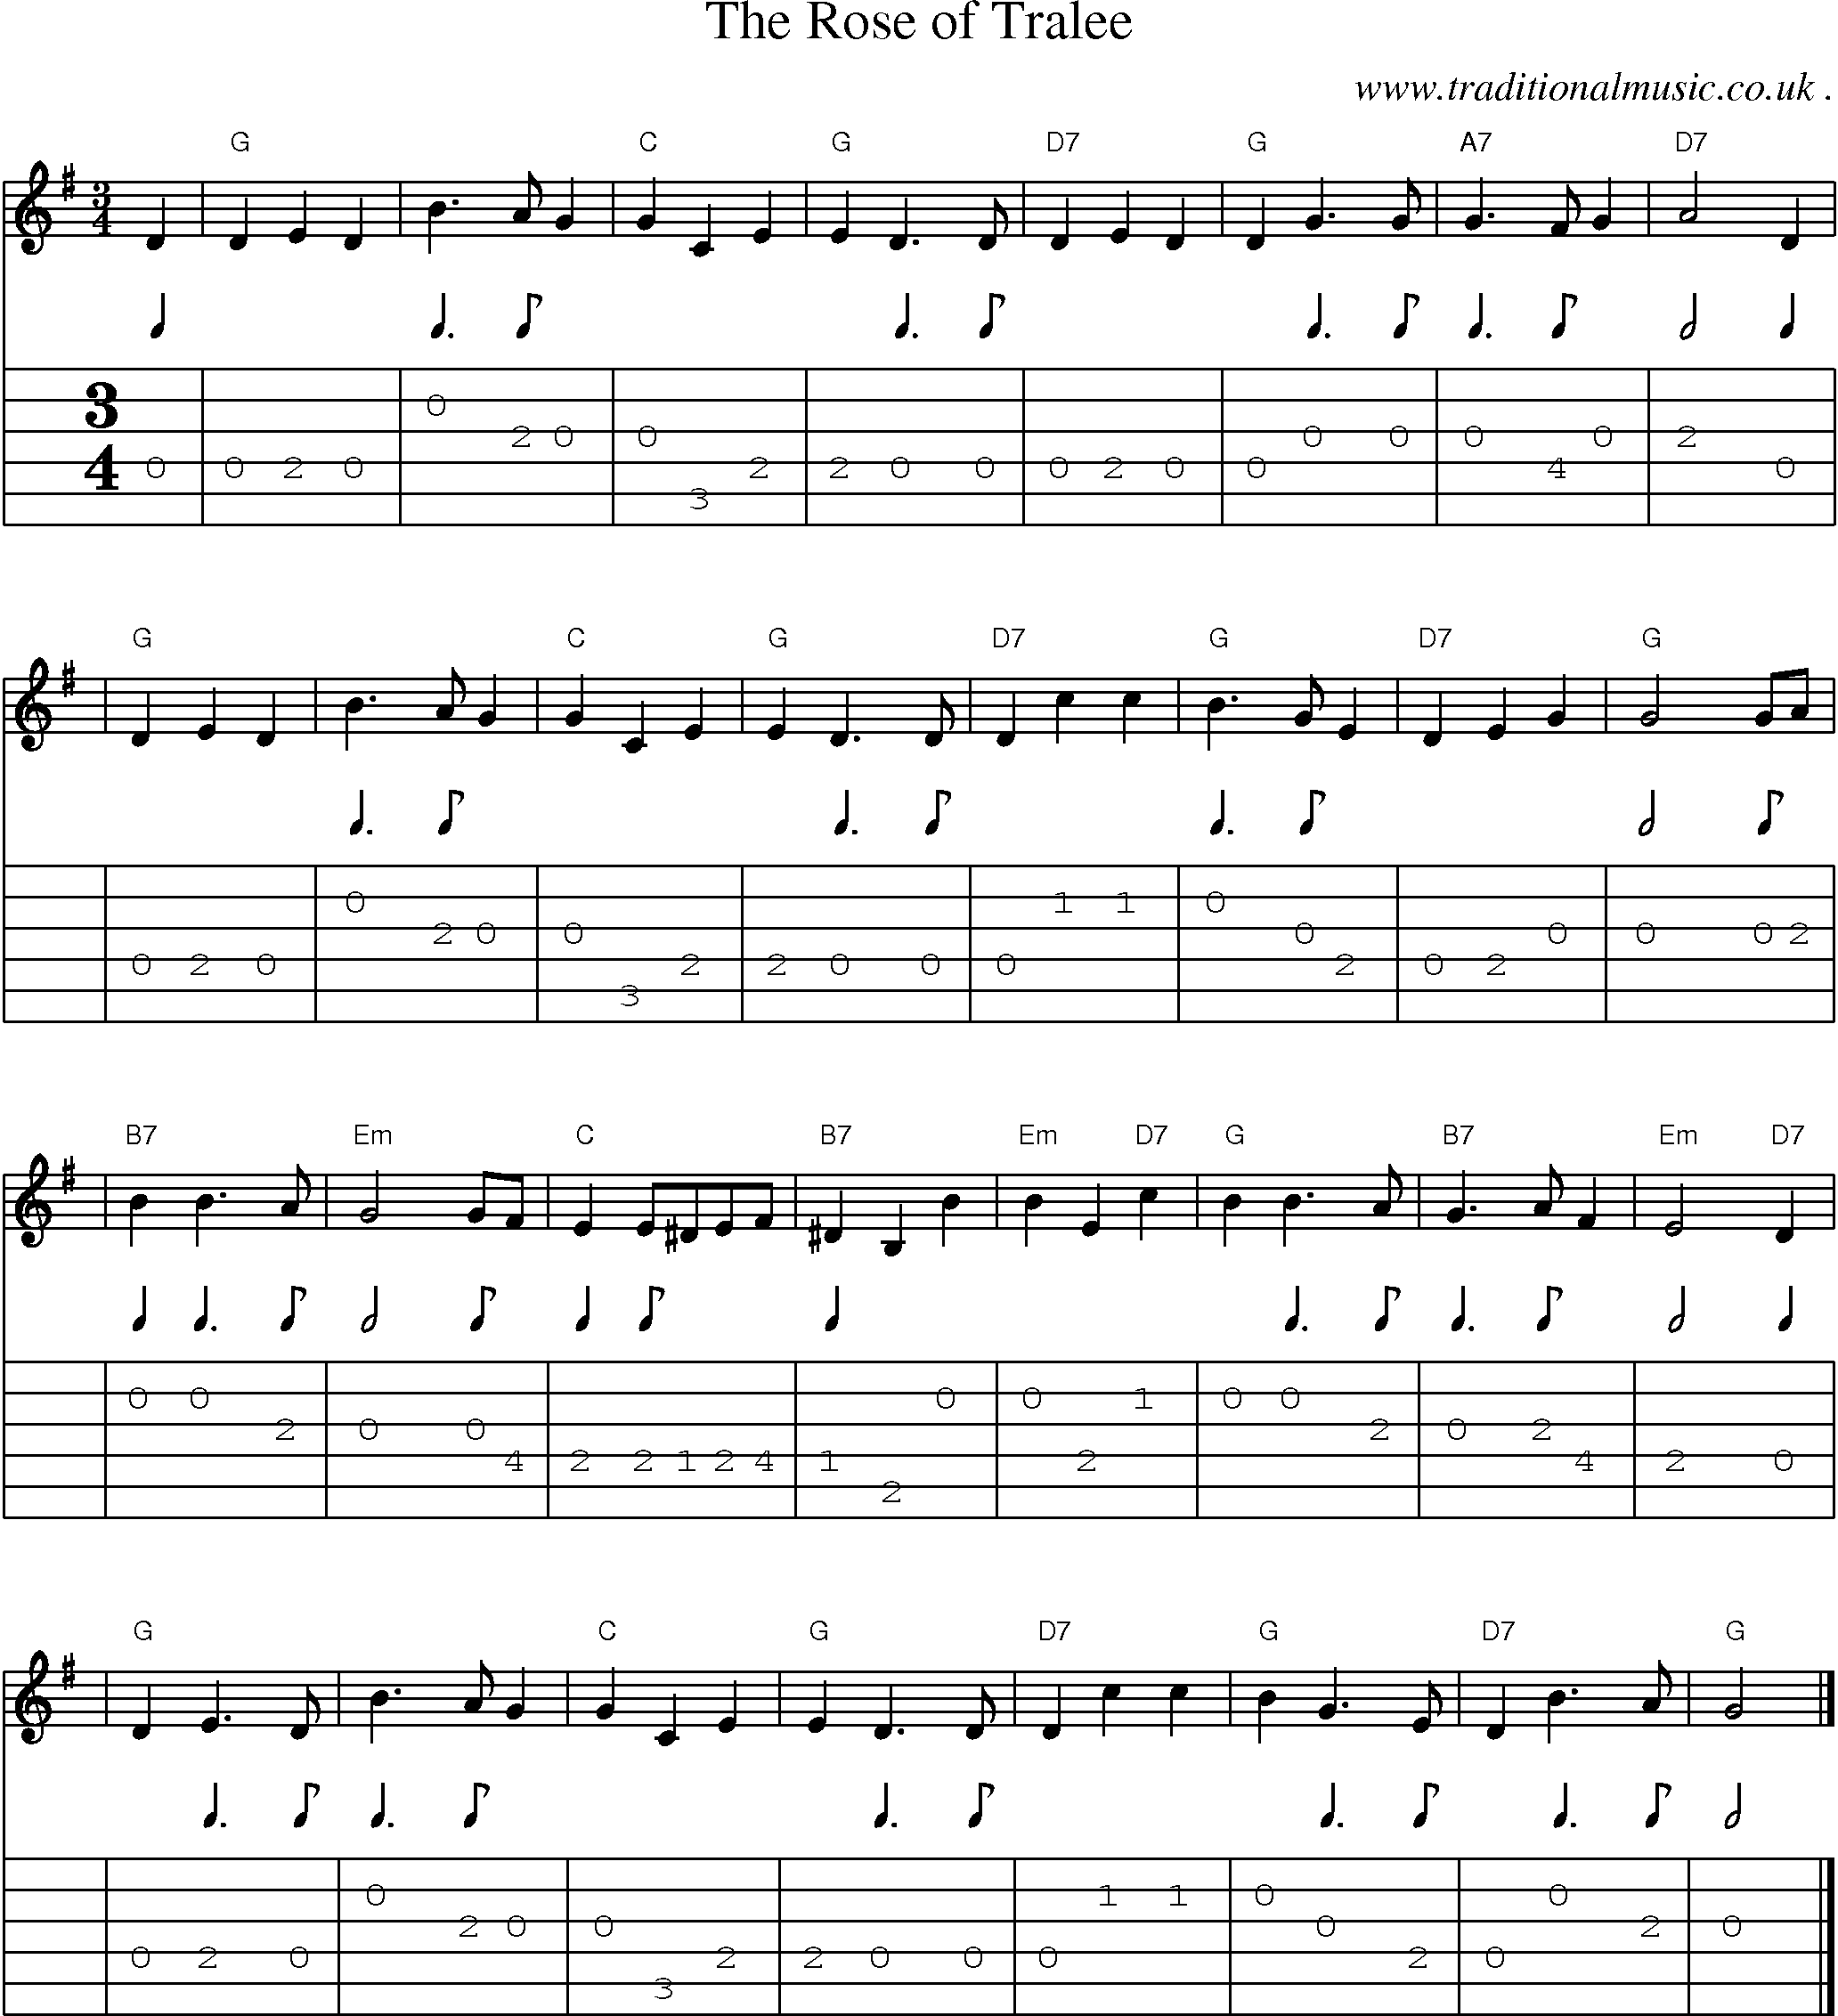 Sheet-music  score, Chords and Guitar Tabs for The Rose Of Tralee